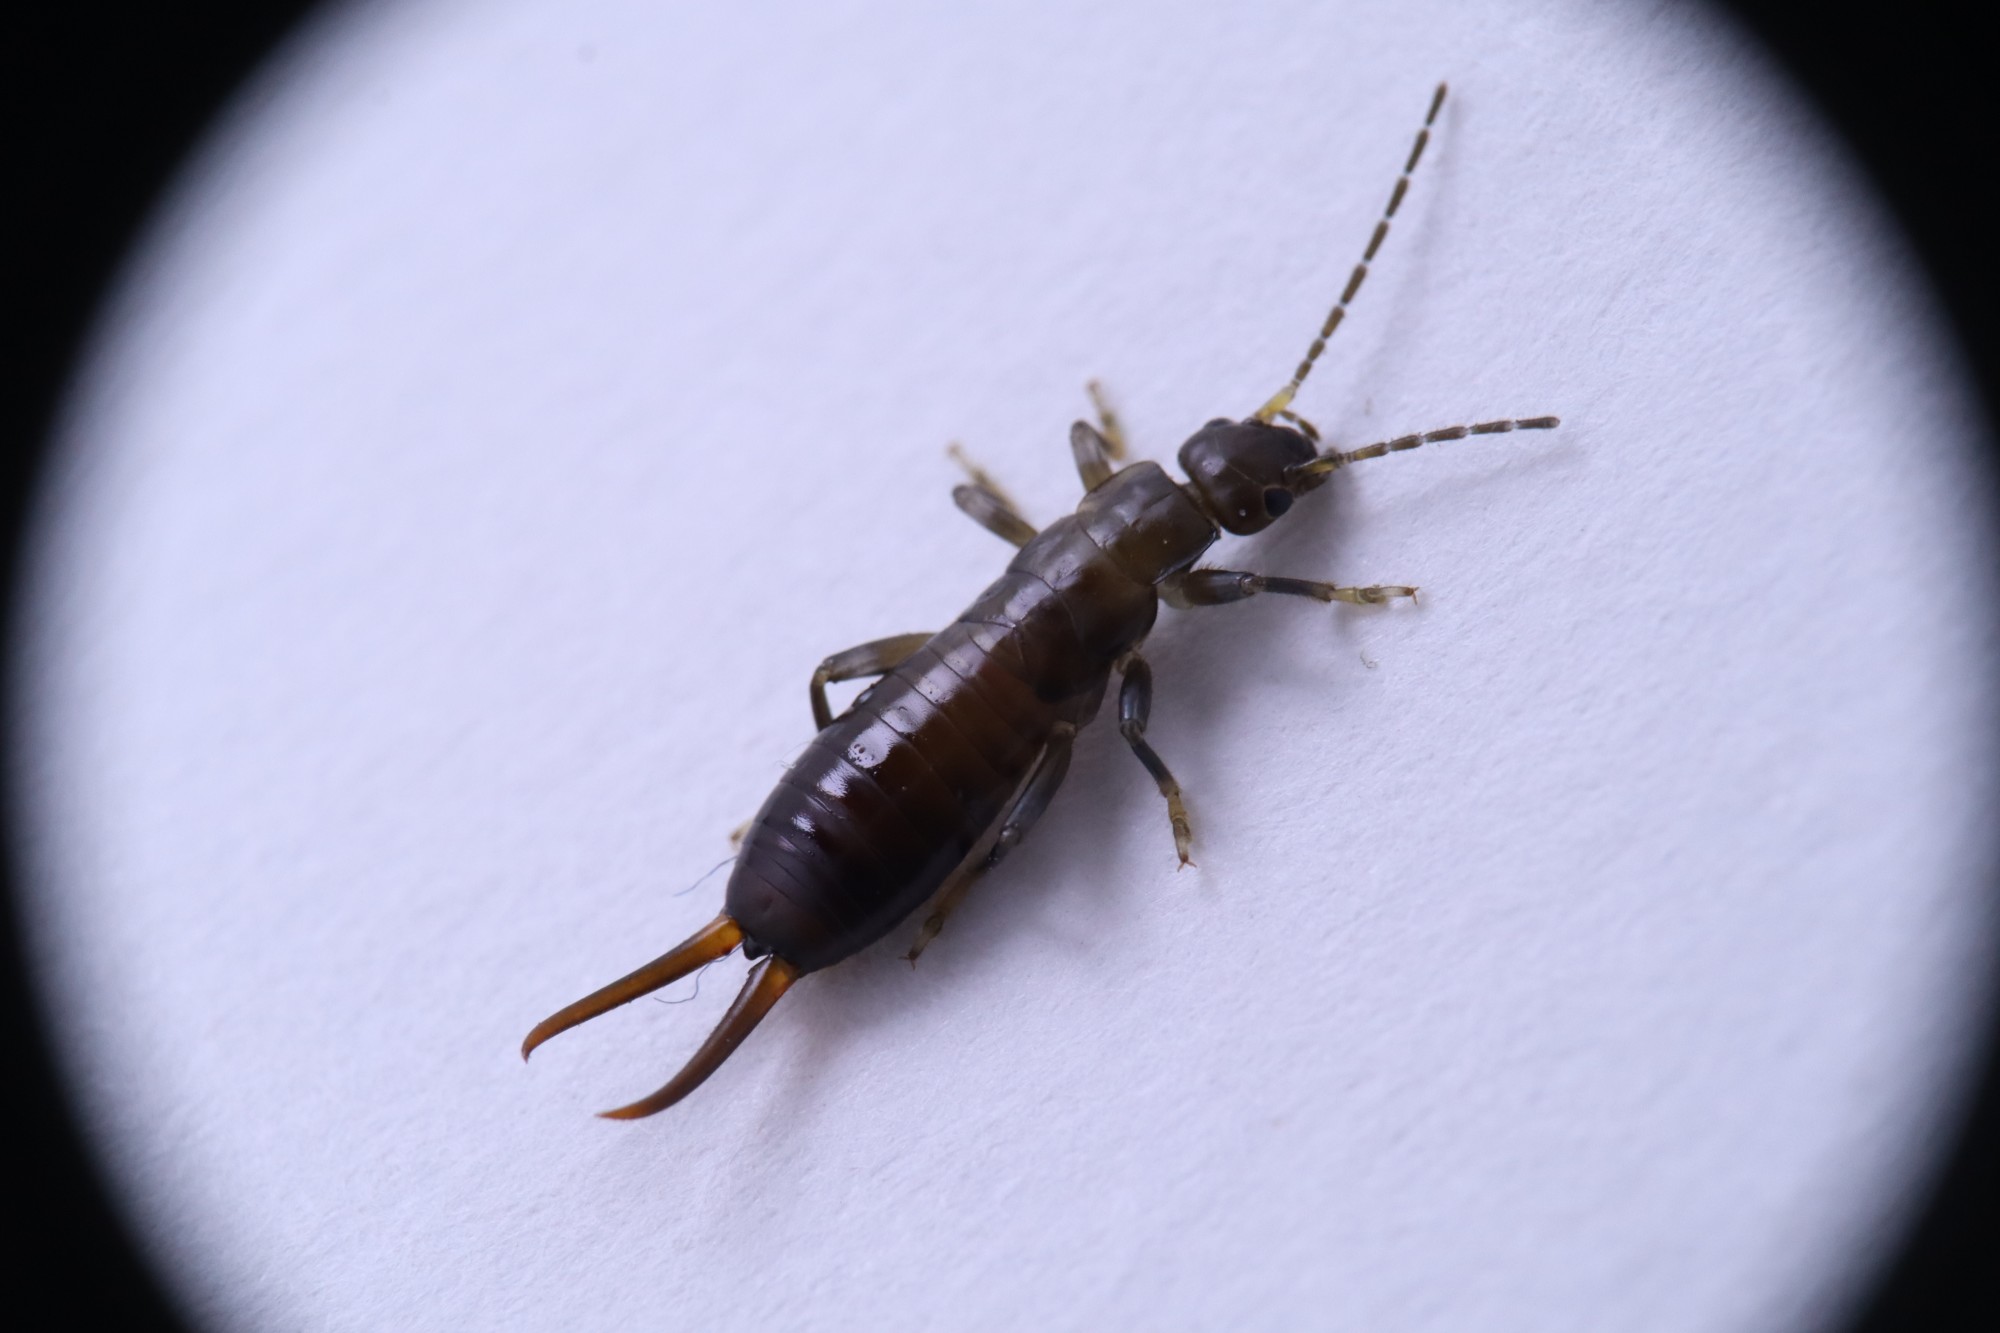 Earwigs in House: A Guide to Causes, Control, and Prevention